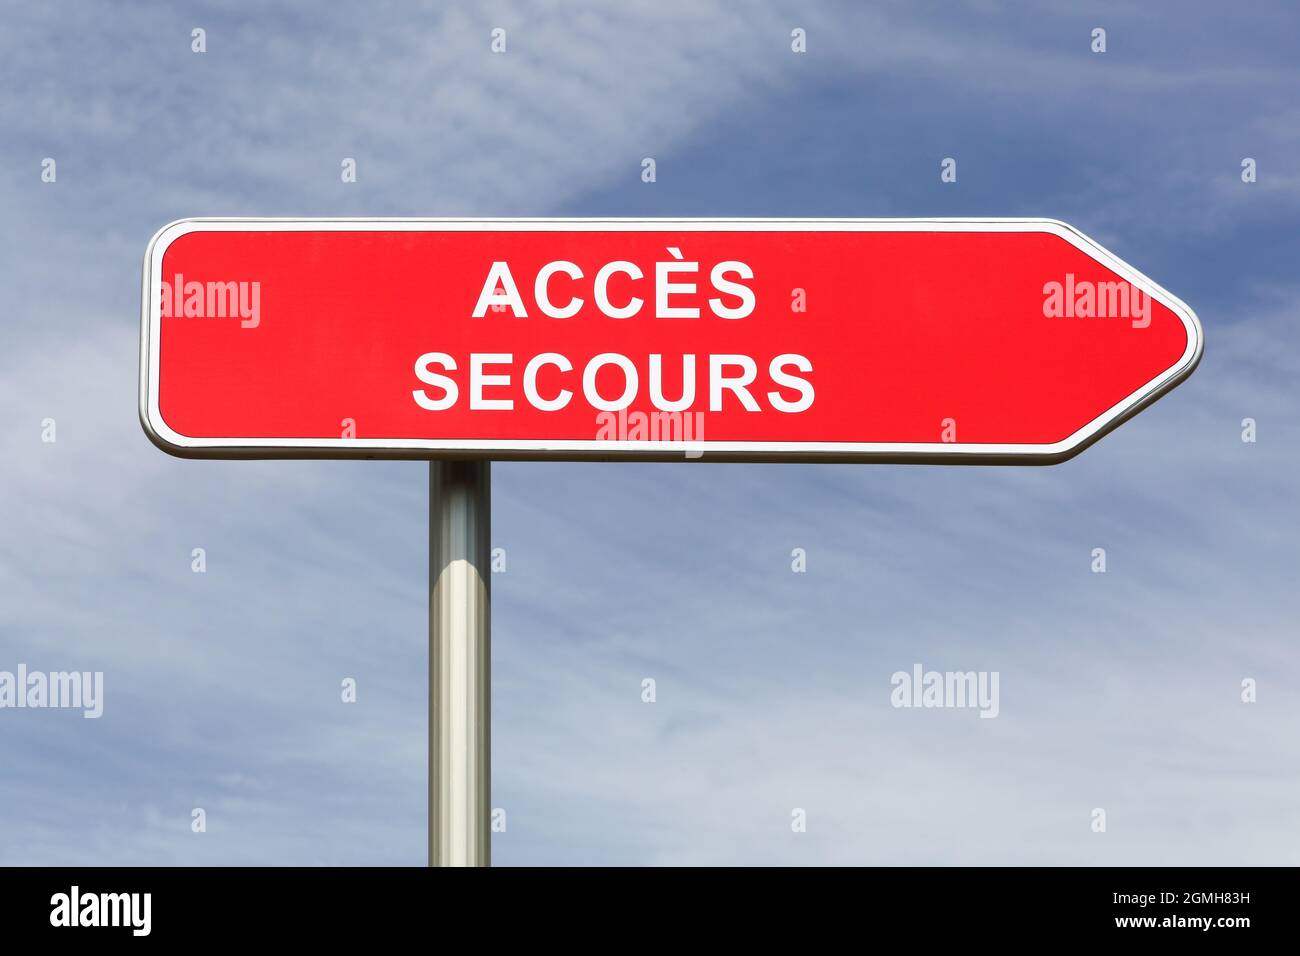 Emergency access road sign called acces secours in french language Stock Photo